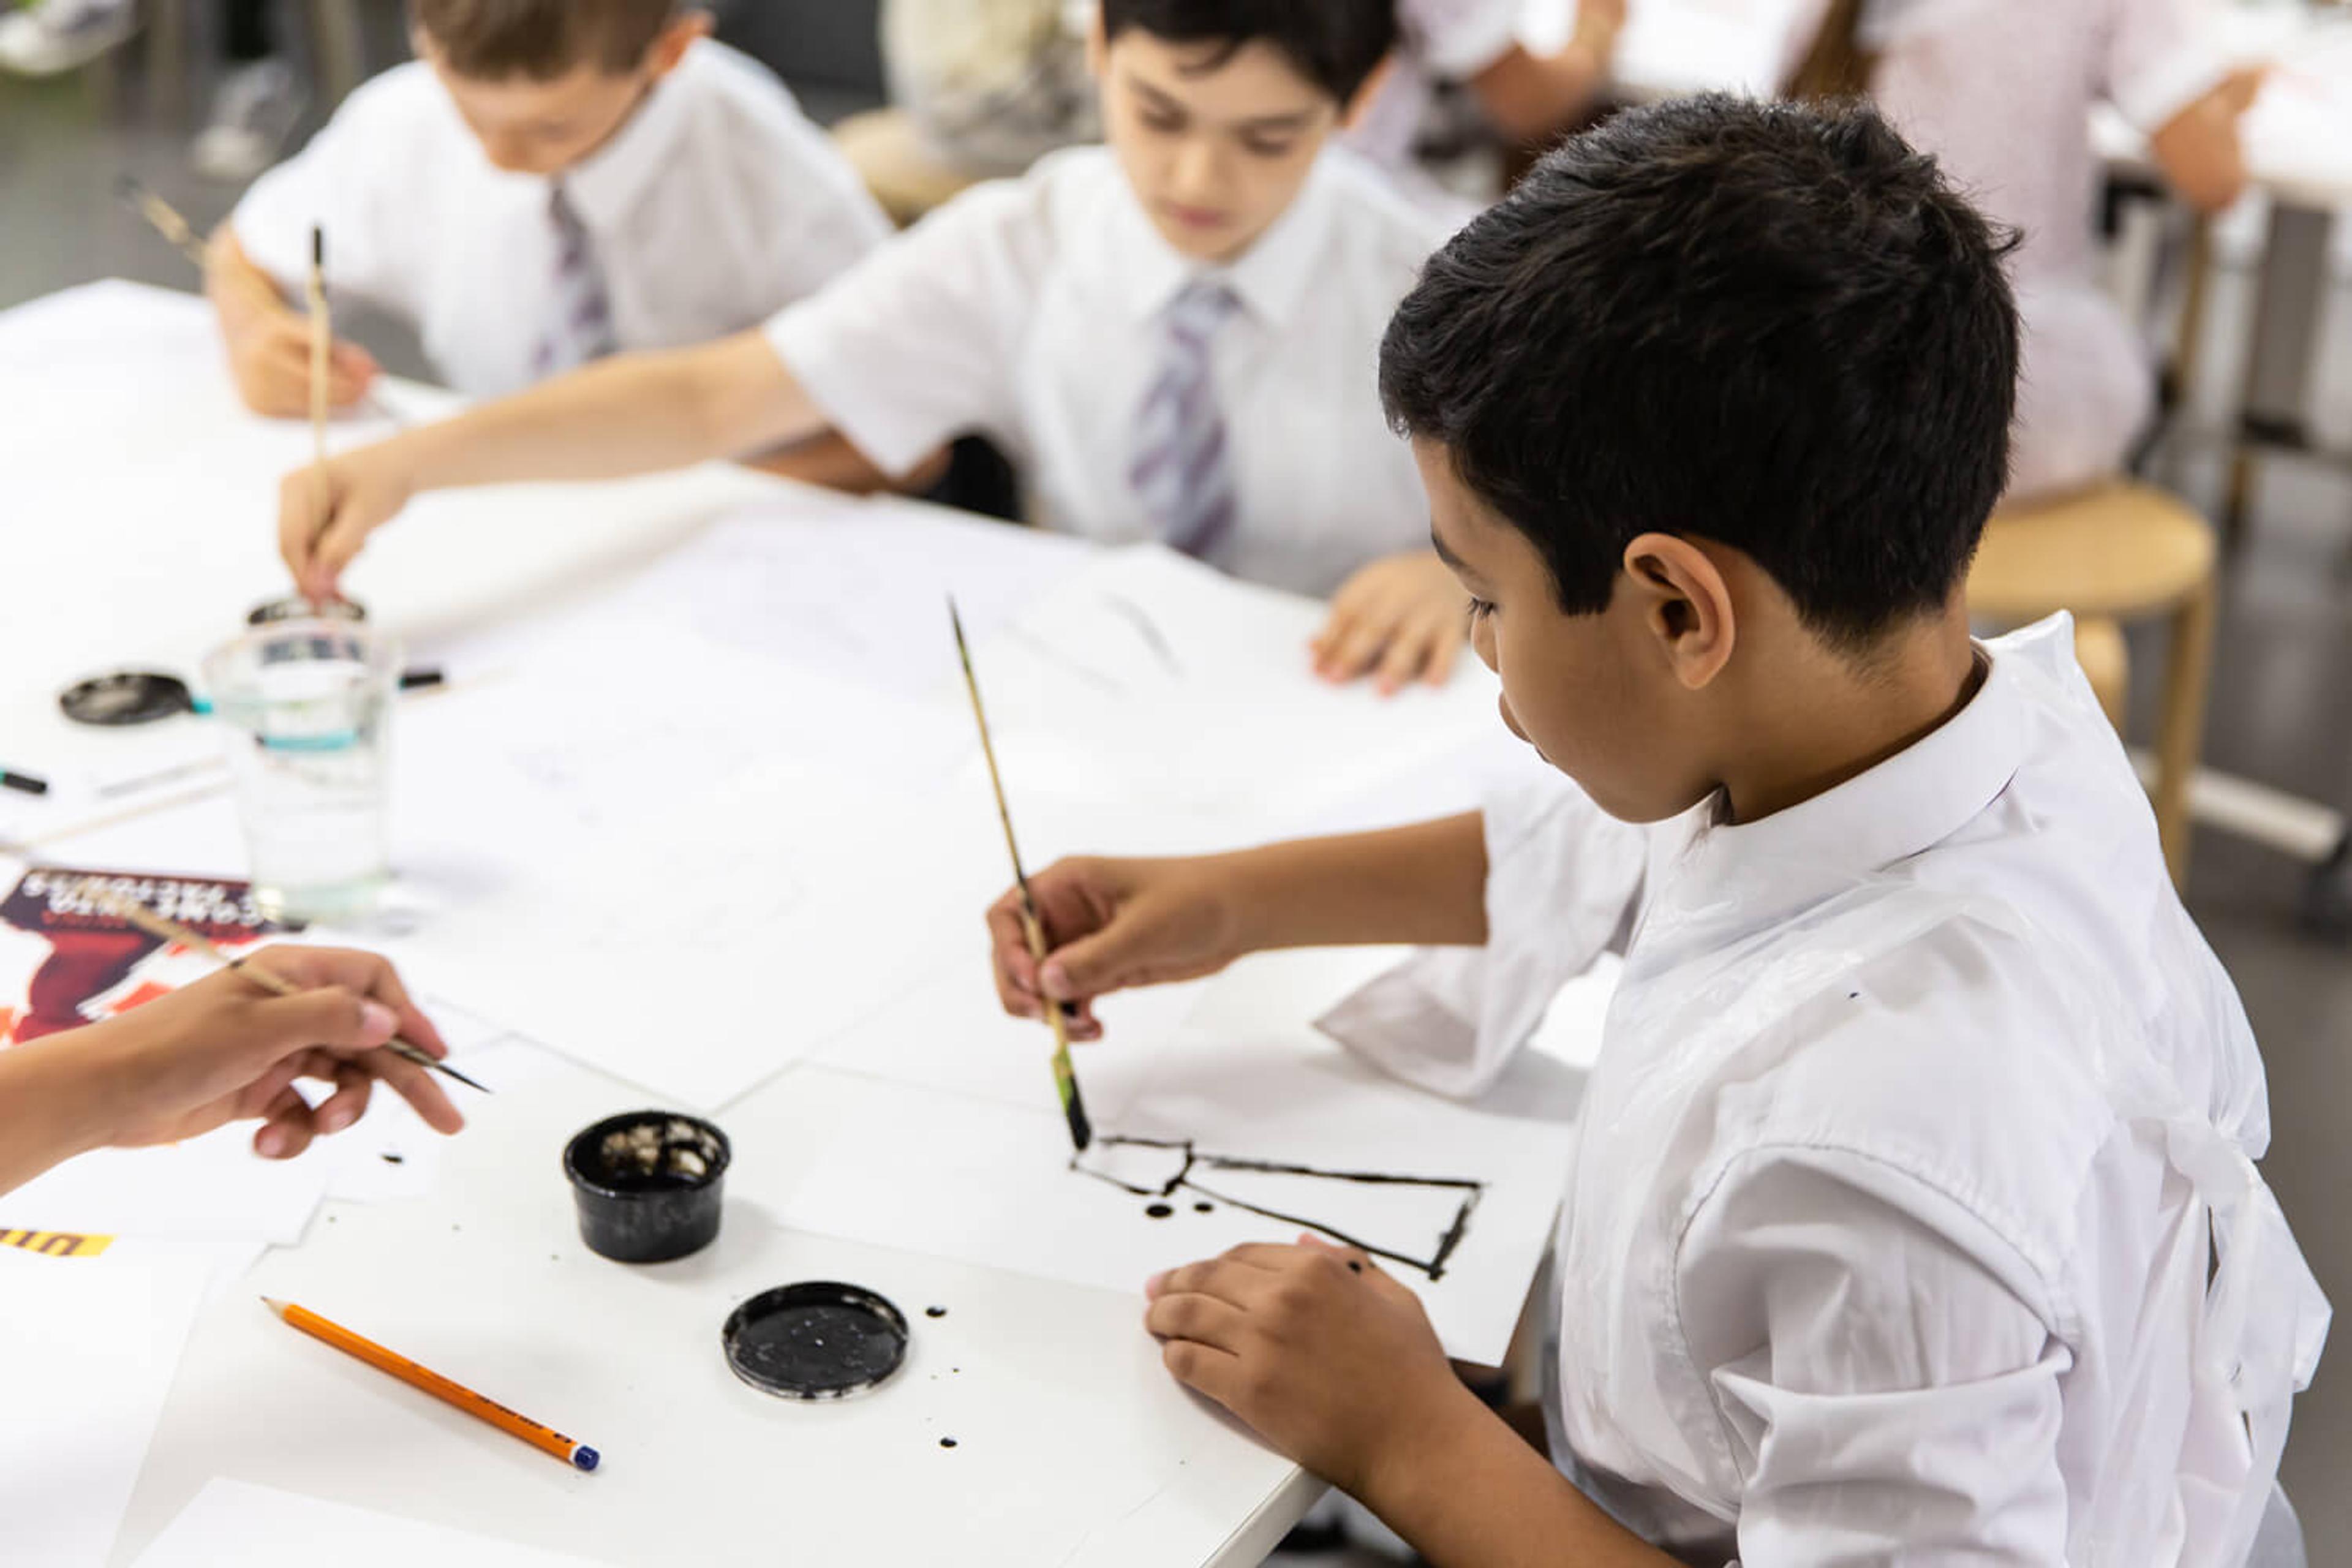 Photograph of 3 school pupils sitting at a table drawing